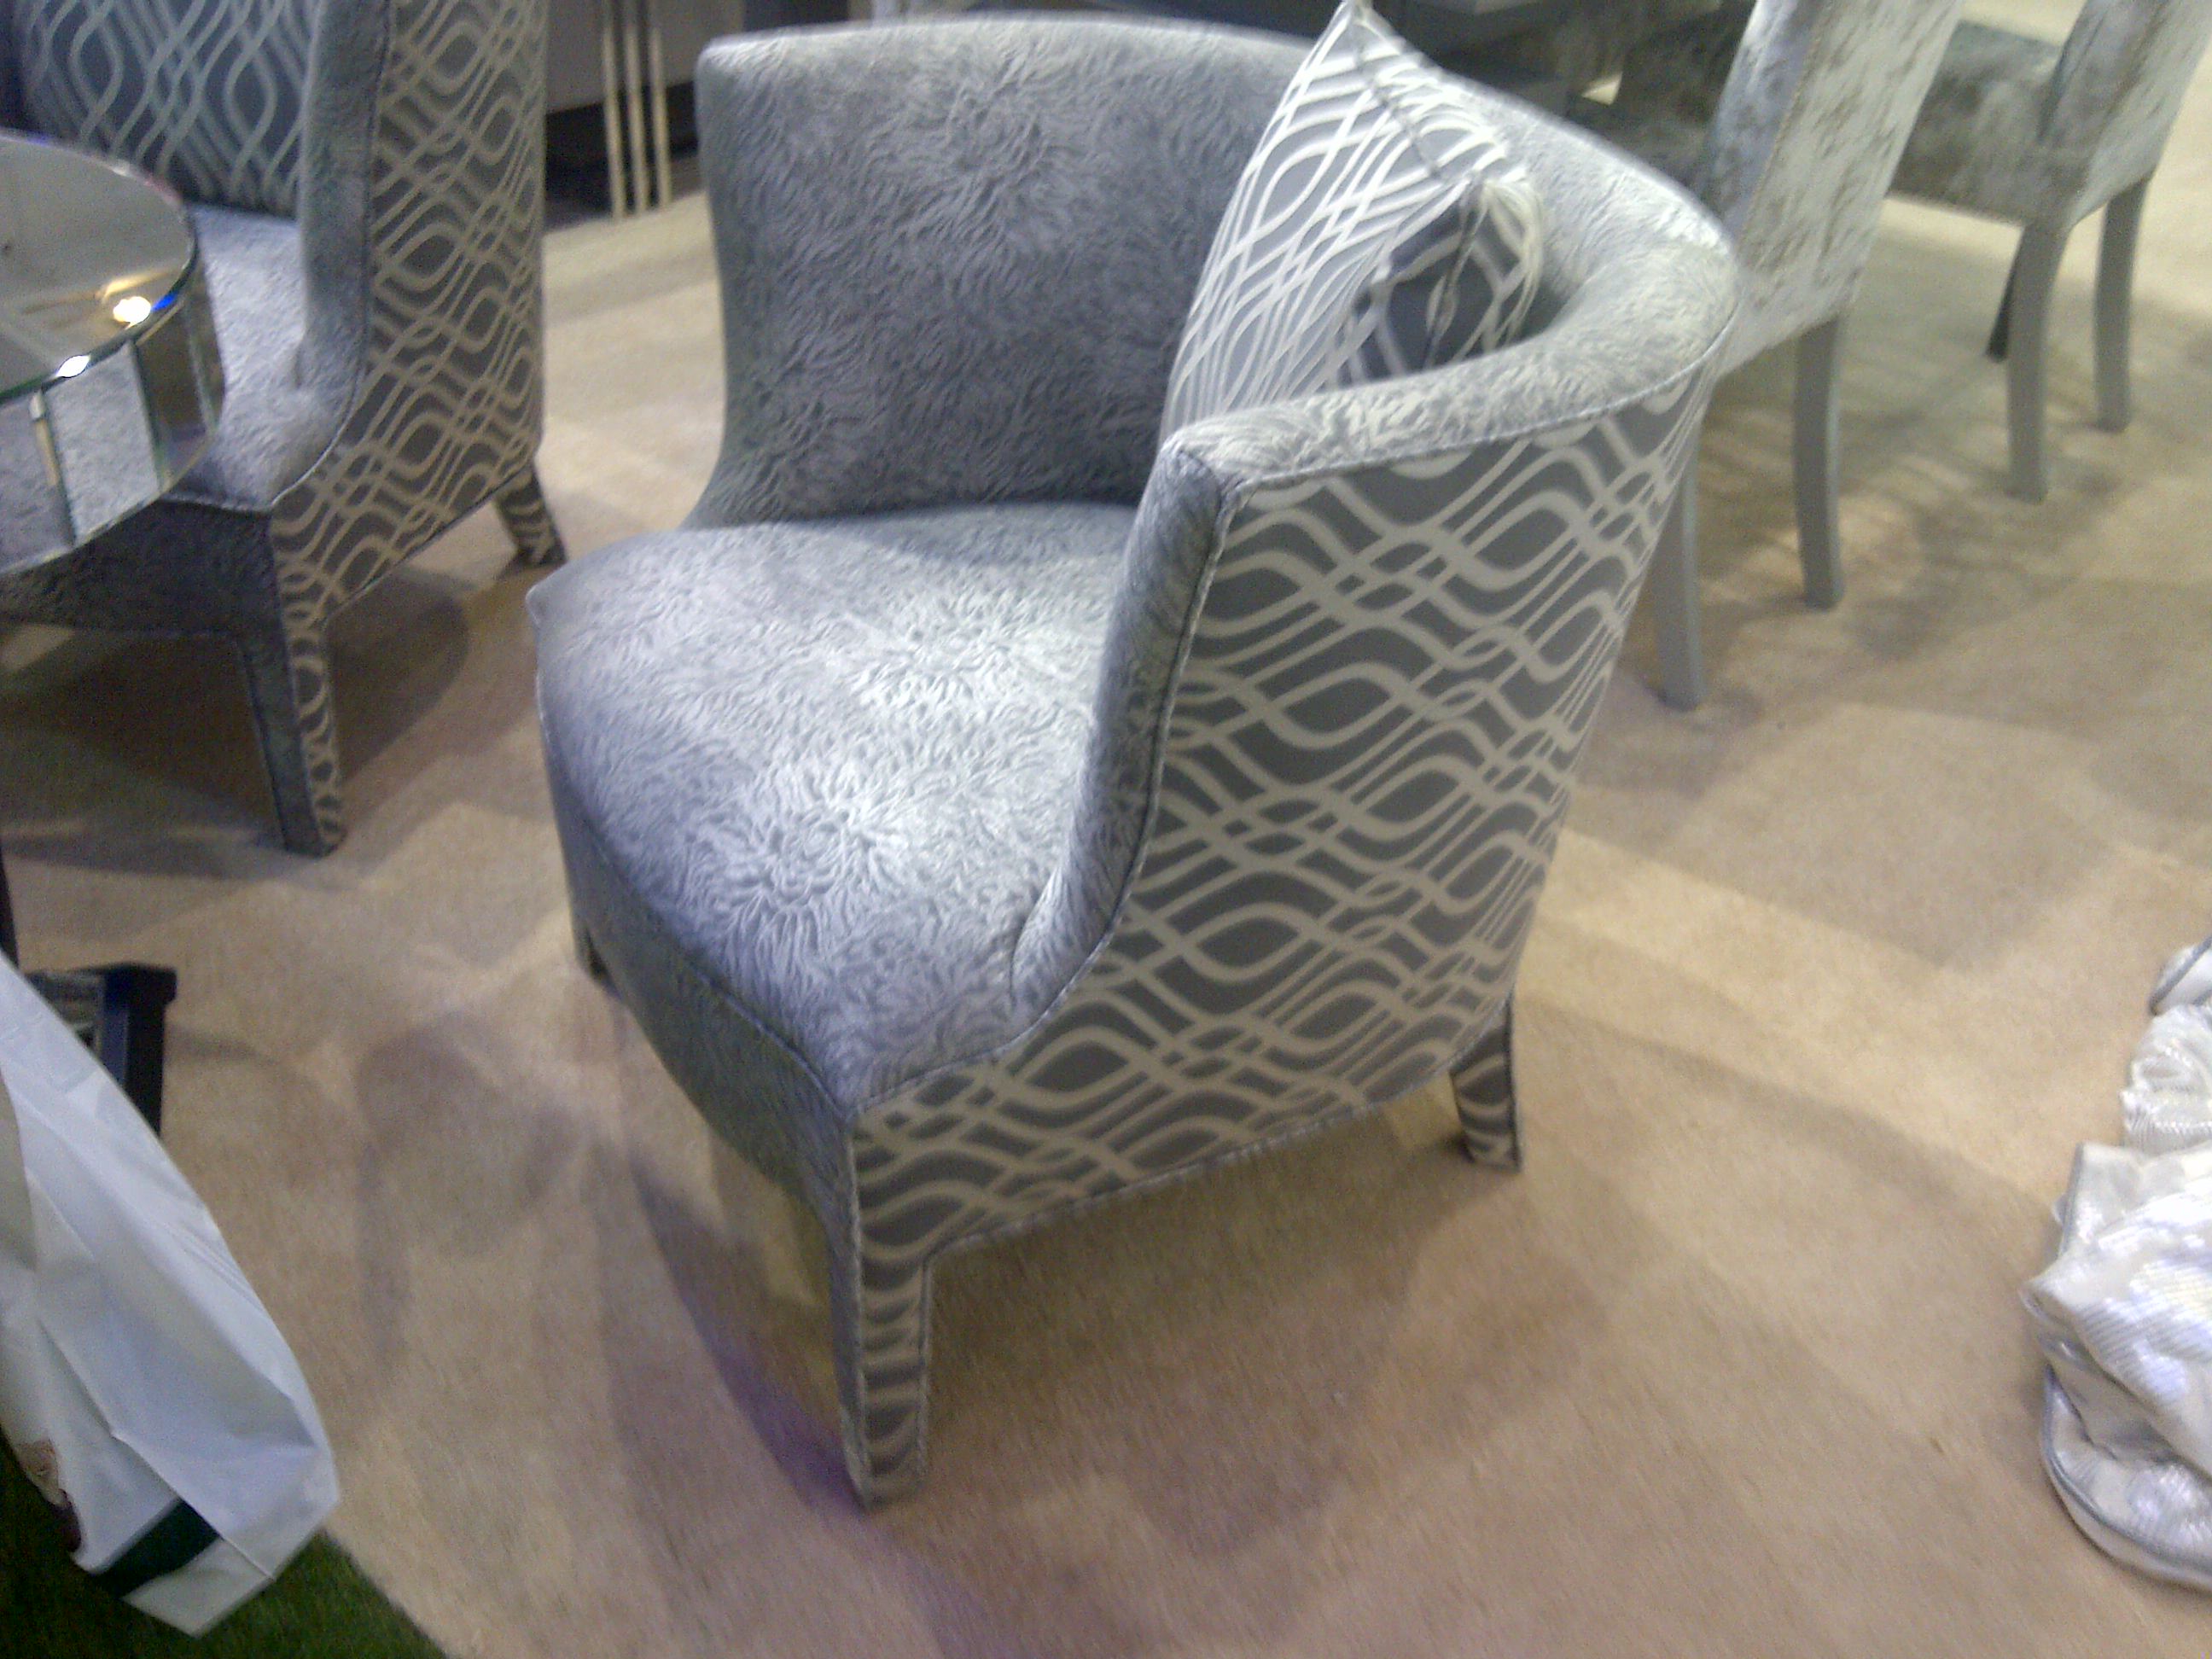 Loved this chair, so comfortable & cute!